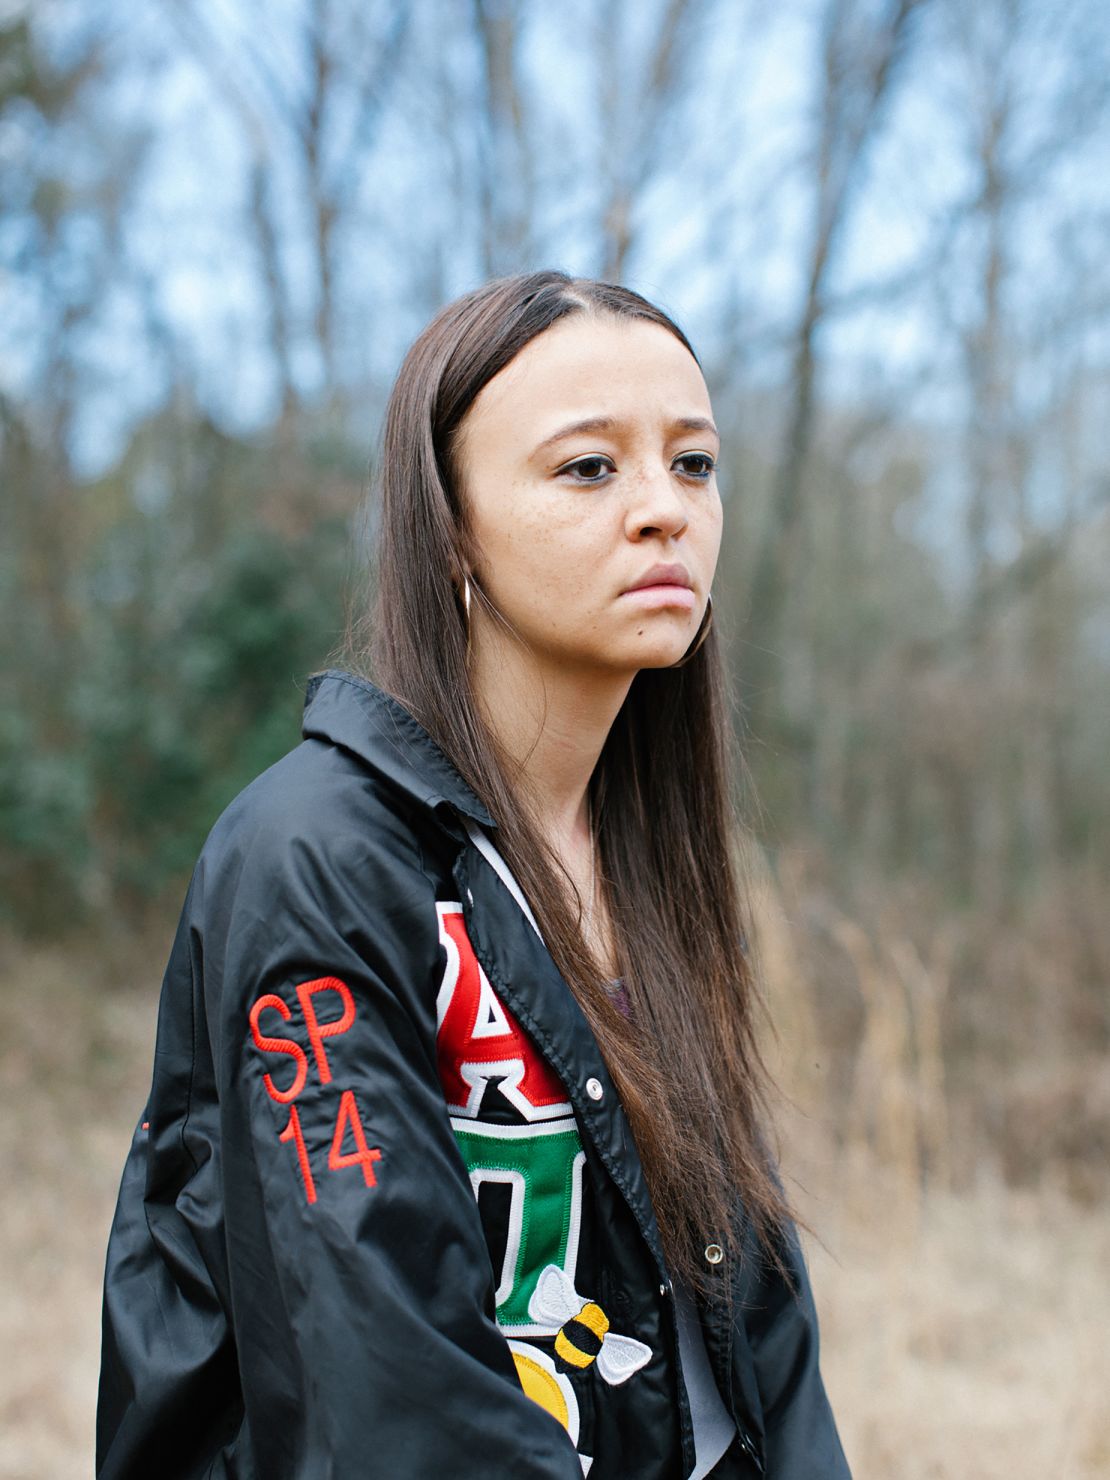 Jasmine is one of several young Lumbee that Sturm photographed for her book "You Don't Look Native To Me."